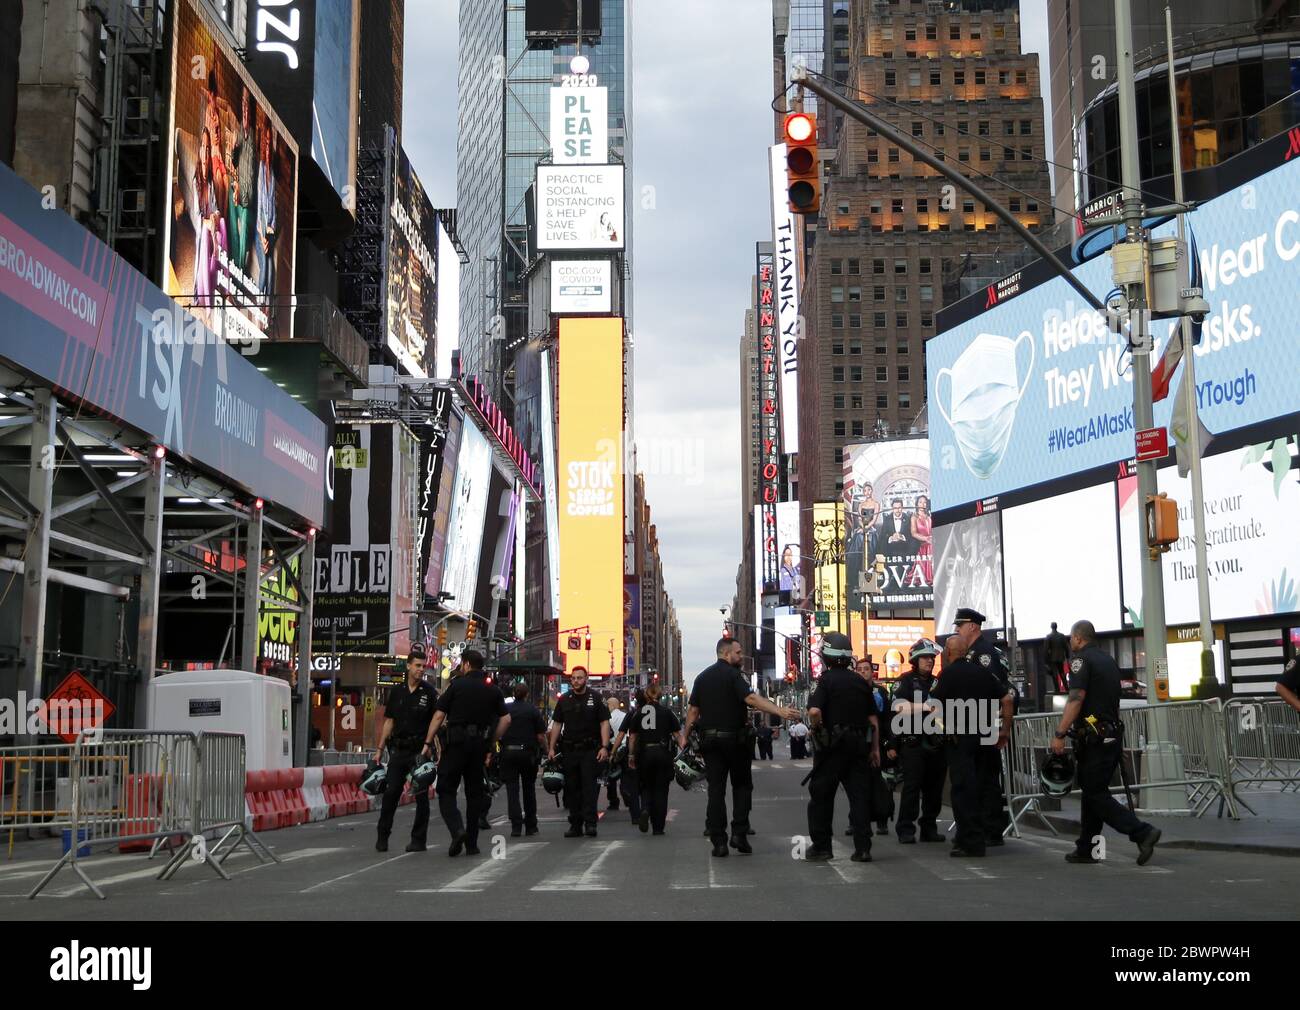 NYPD Police officers lock up Times Square before the 8 p.m. to 5 a.m. curfew for New York City on Blackout Tuesday and another night of unrest in Manhattan as protests, looting and rioting around the country continue over the death of George Floyd in New York City on Tuesday, June 2, 2020. Former Minneapolis police officer Derek Chauvin was arrested Friday days after video circulated of him holding his knee to George Floyd's neck for more than eight minutes before Floyd died. All four officers involved in the incident also have been fired from the Minneapolis Police Department. Photo by Joh Stock Photo